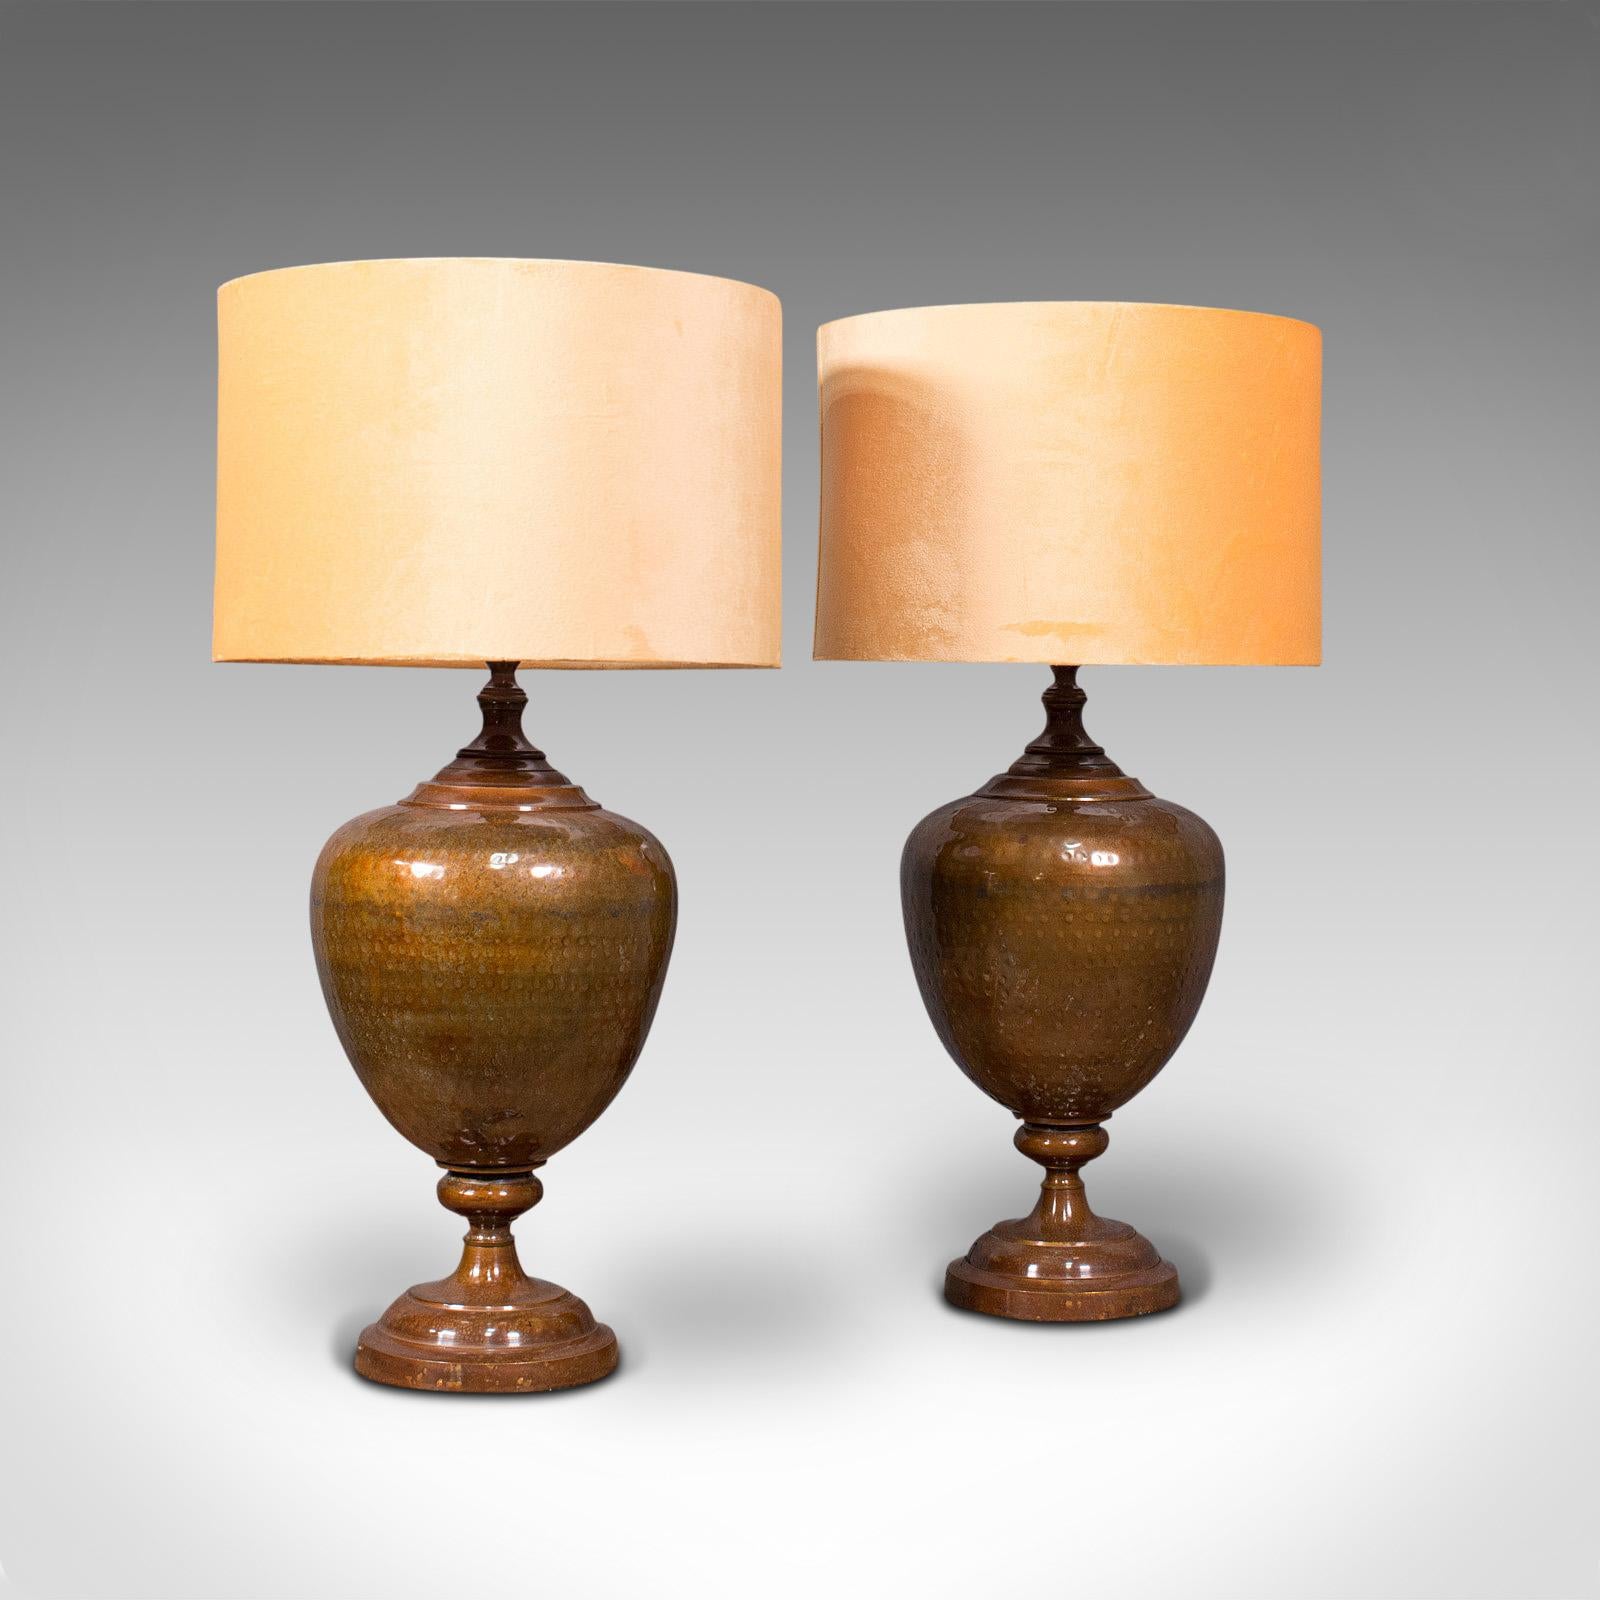 This is a pair of vintage table lamps. An English, brass decorative side light, dating to the mid 20th century, circa 1940.

Large baluster form to body with distinctive finish
Displaying a desirable aged patina - both supplied with tasteful